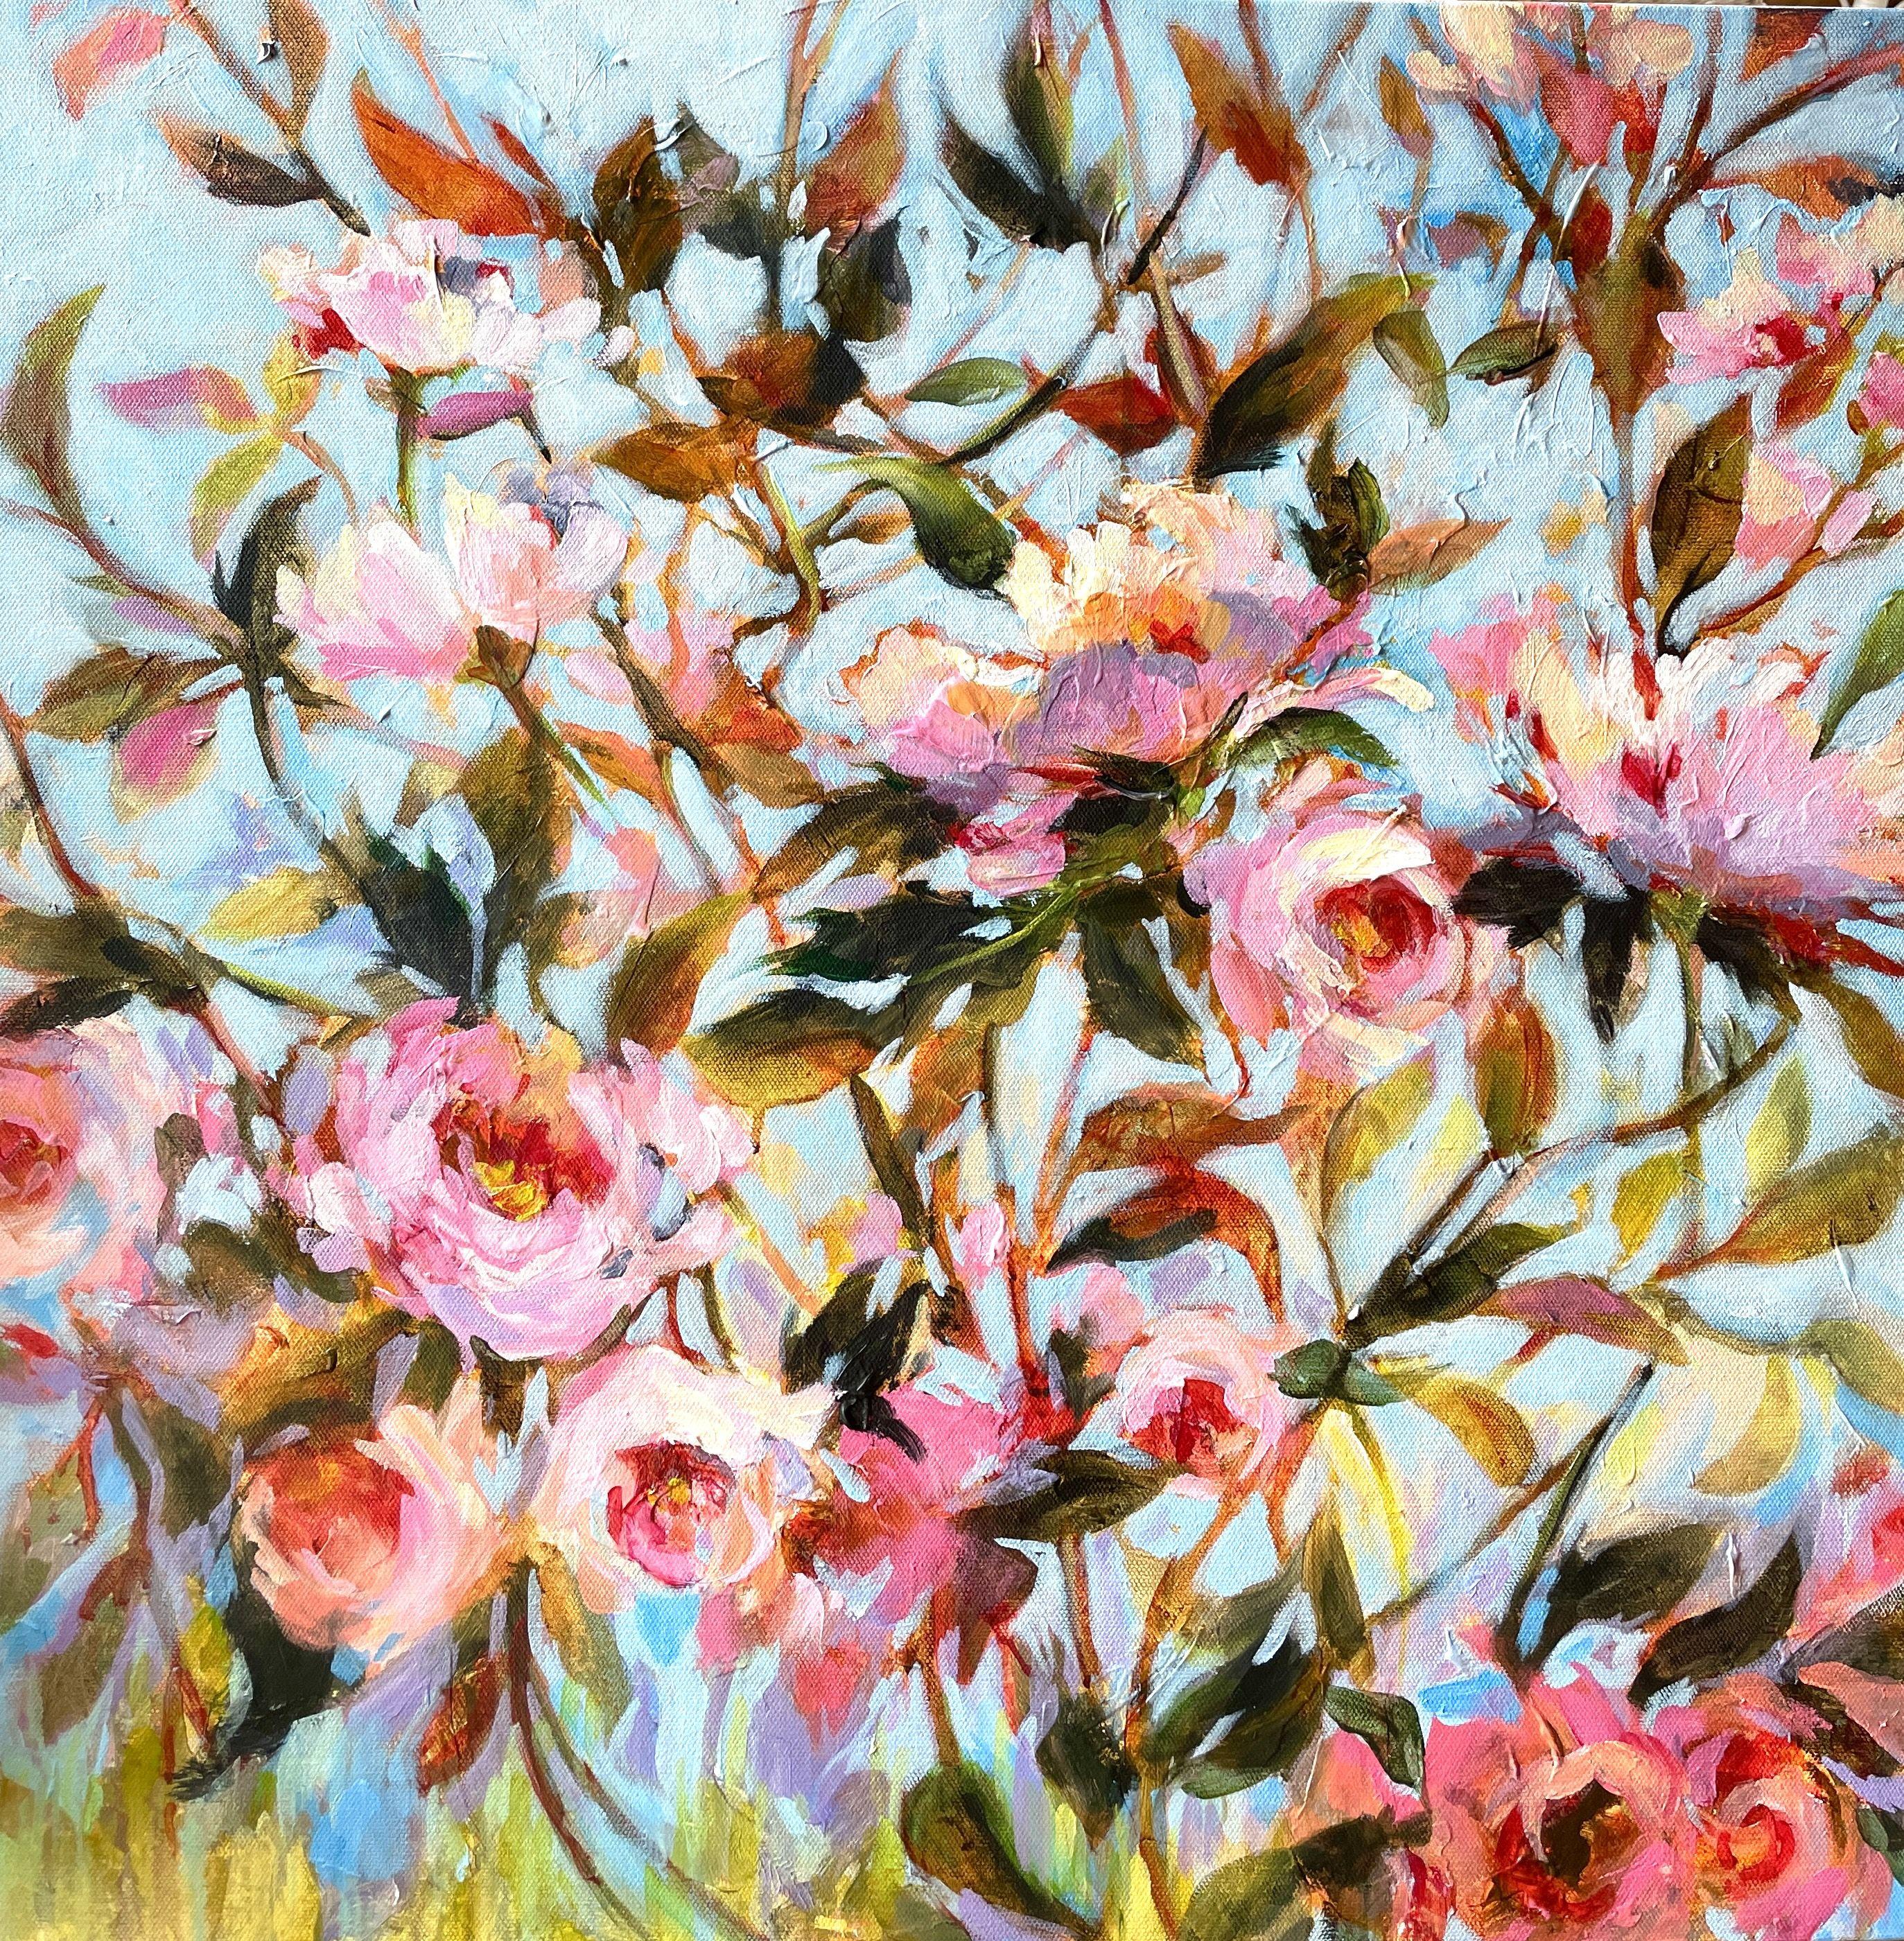 Expressive semi abstract floral. It has a very fresh, bold but sophisticated color palette. A tapestry of color and rhythm. Warm and cool pinks balance with the icy blue background. Very textured surface adds to the depth and interest. This is an